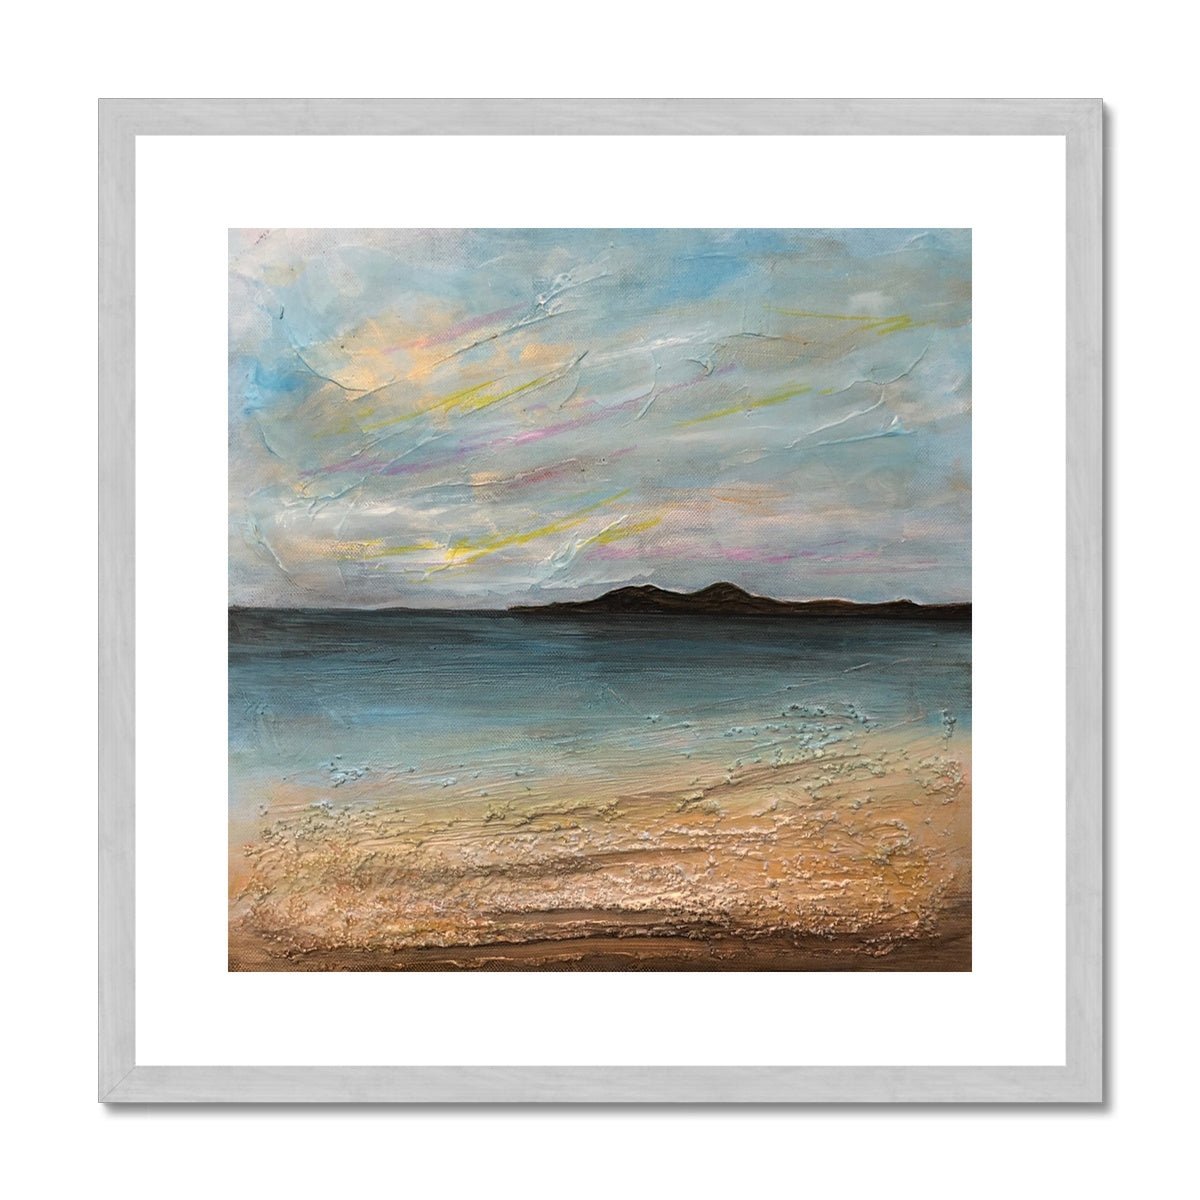 Garrynamonie Beach South Uist Painting | Antique Framed & Mounted Prints From Scotland-Antique Framed & Mounted Prints-Hebridean Islands Art Gallery-20"x20"-Silver Frame-Paintings, Prints, Homeware, Art Gifts From Scotland By Scottish Artist Kevin Hunter